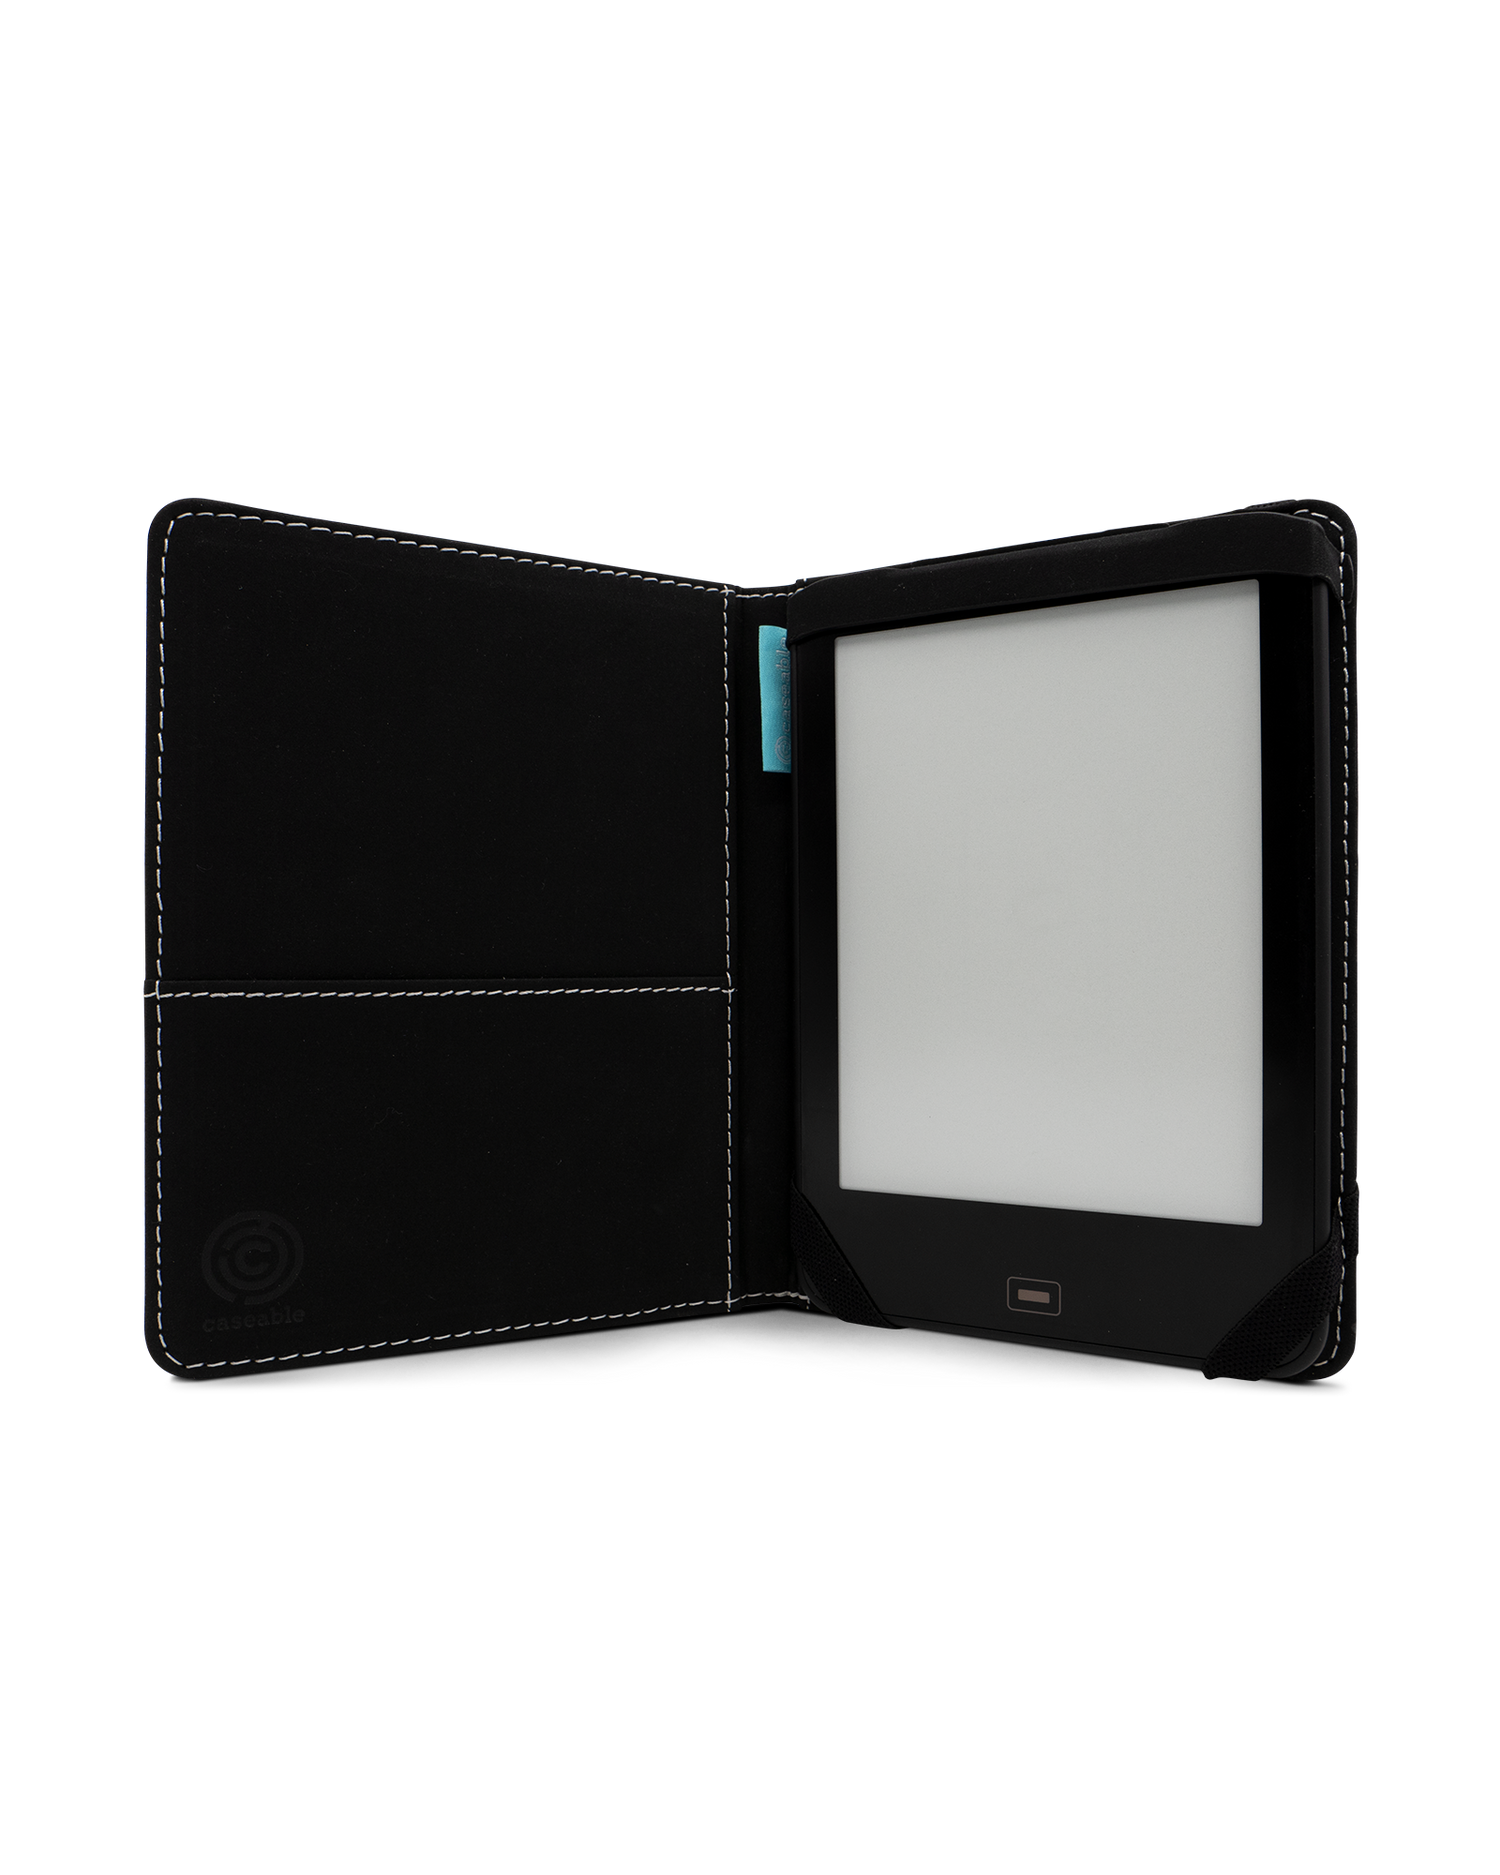 Mother of Pearl Marble eReader Case for tolino vision 1 to 4 HD: Opened interior view